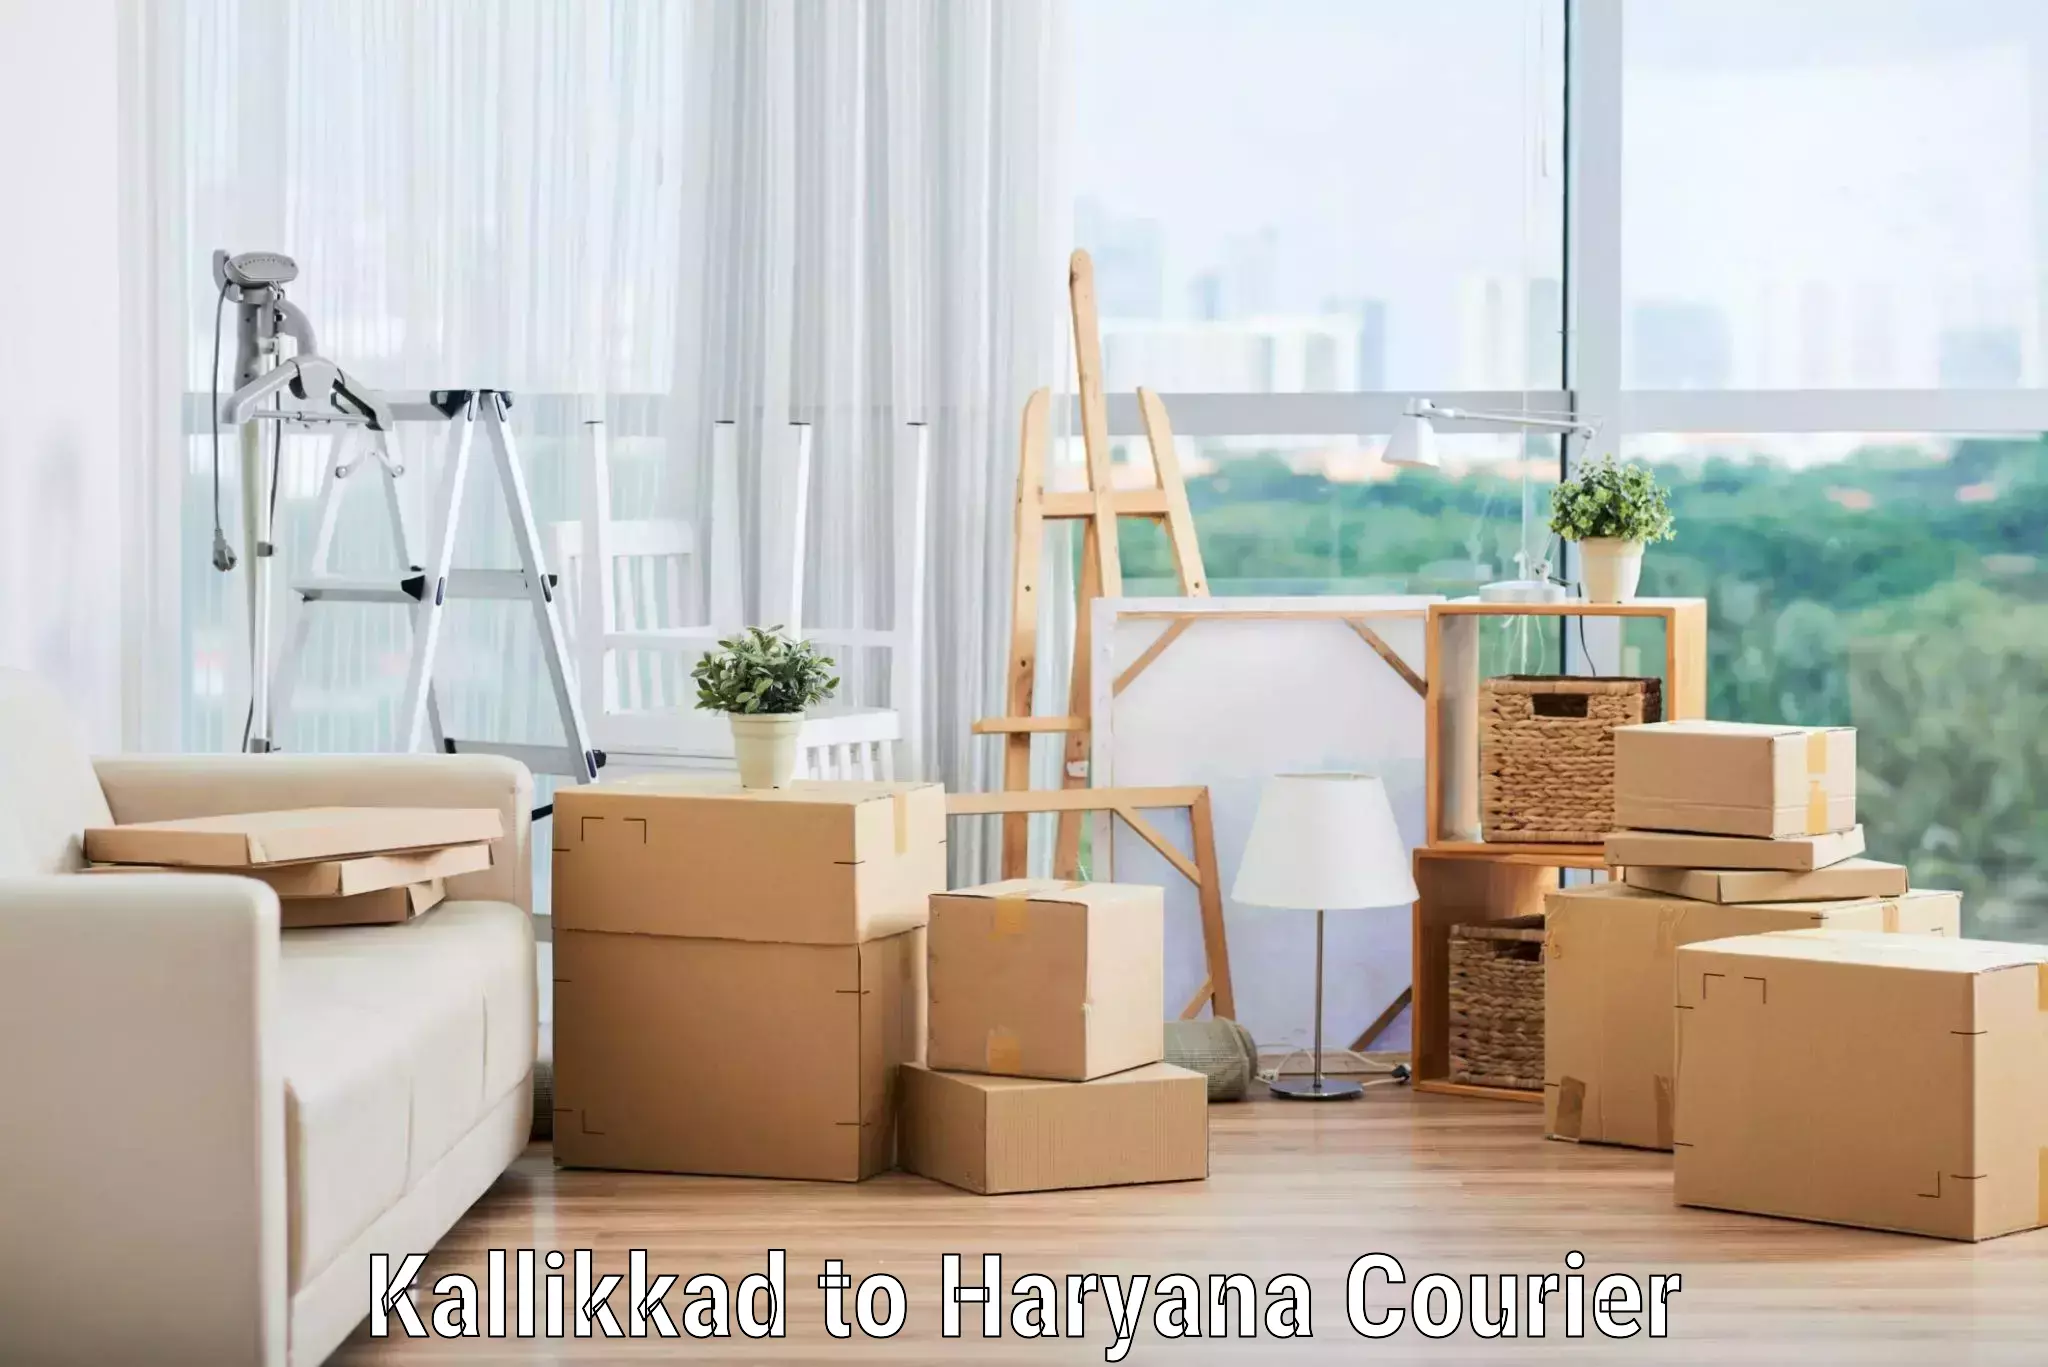 Furniture delivery service Kallikkad to Sonipat